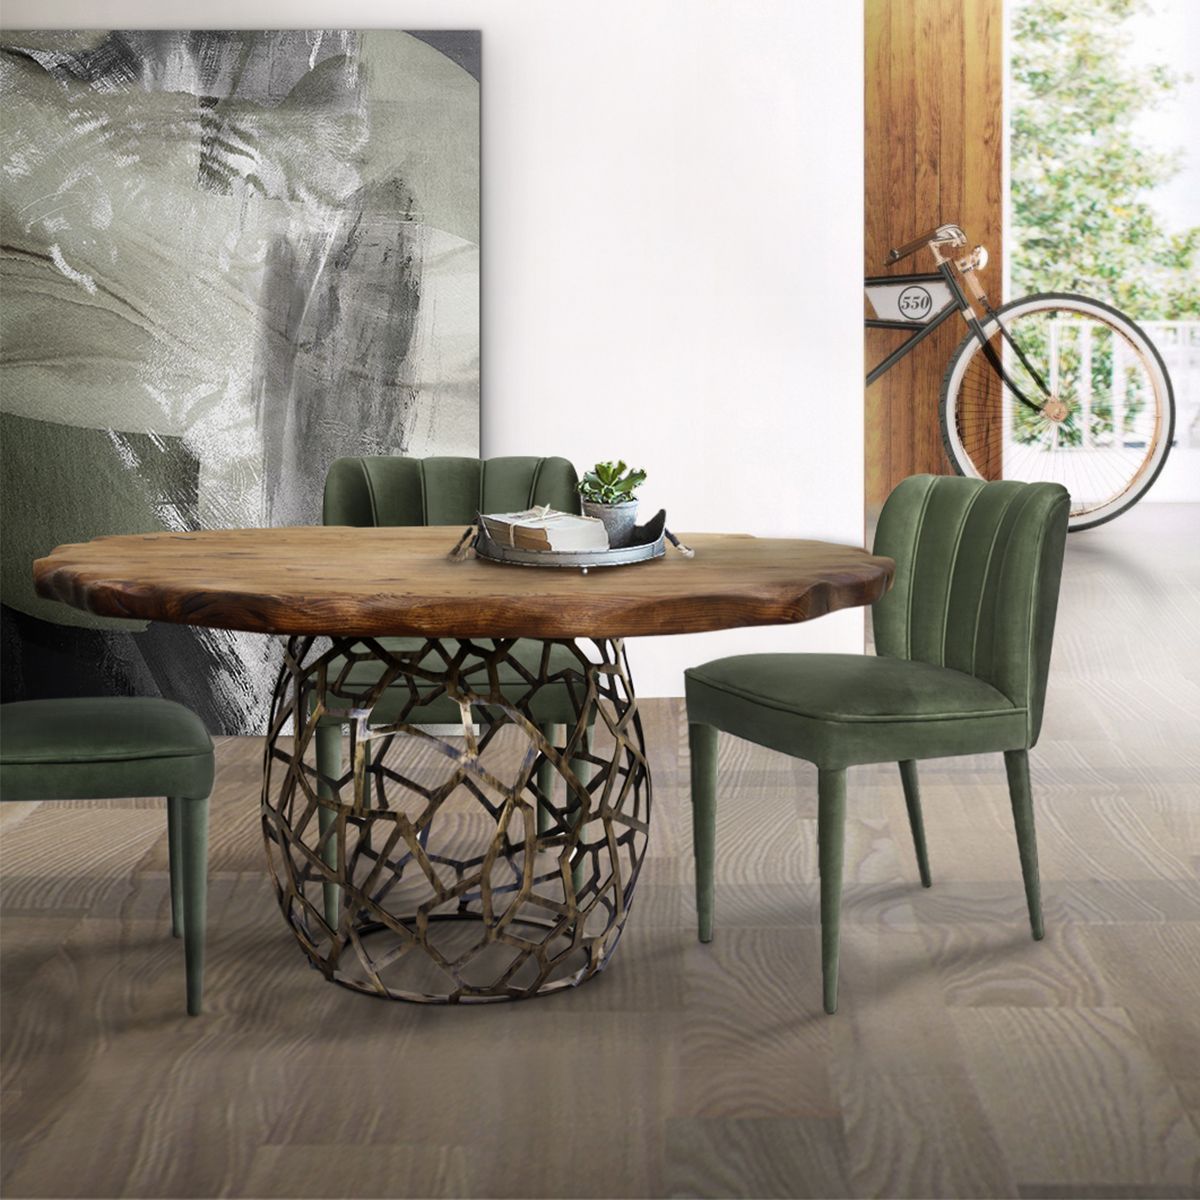 Inspired by the look - Dalyan Dining Chair